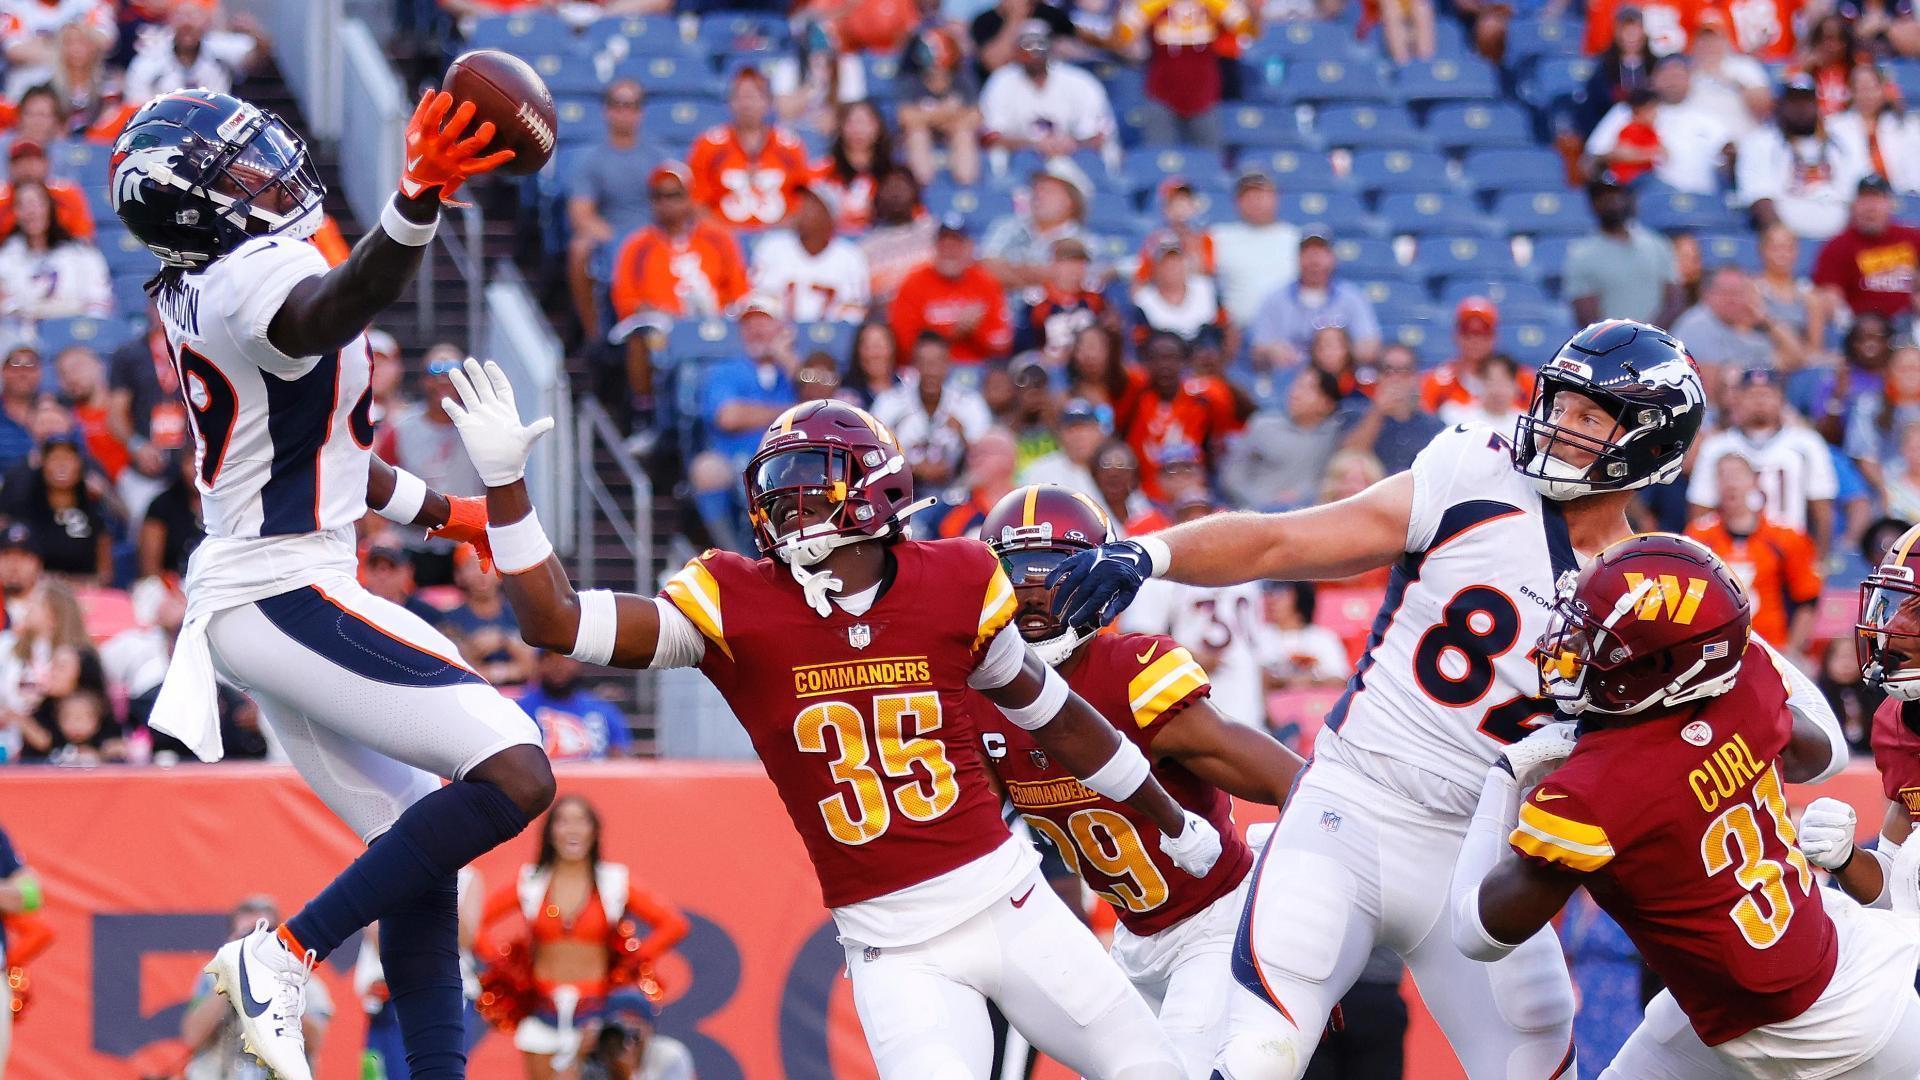 Commanders prevail after Broncos' Hail Mary TD, failed 2point